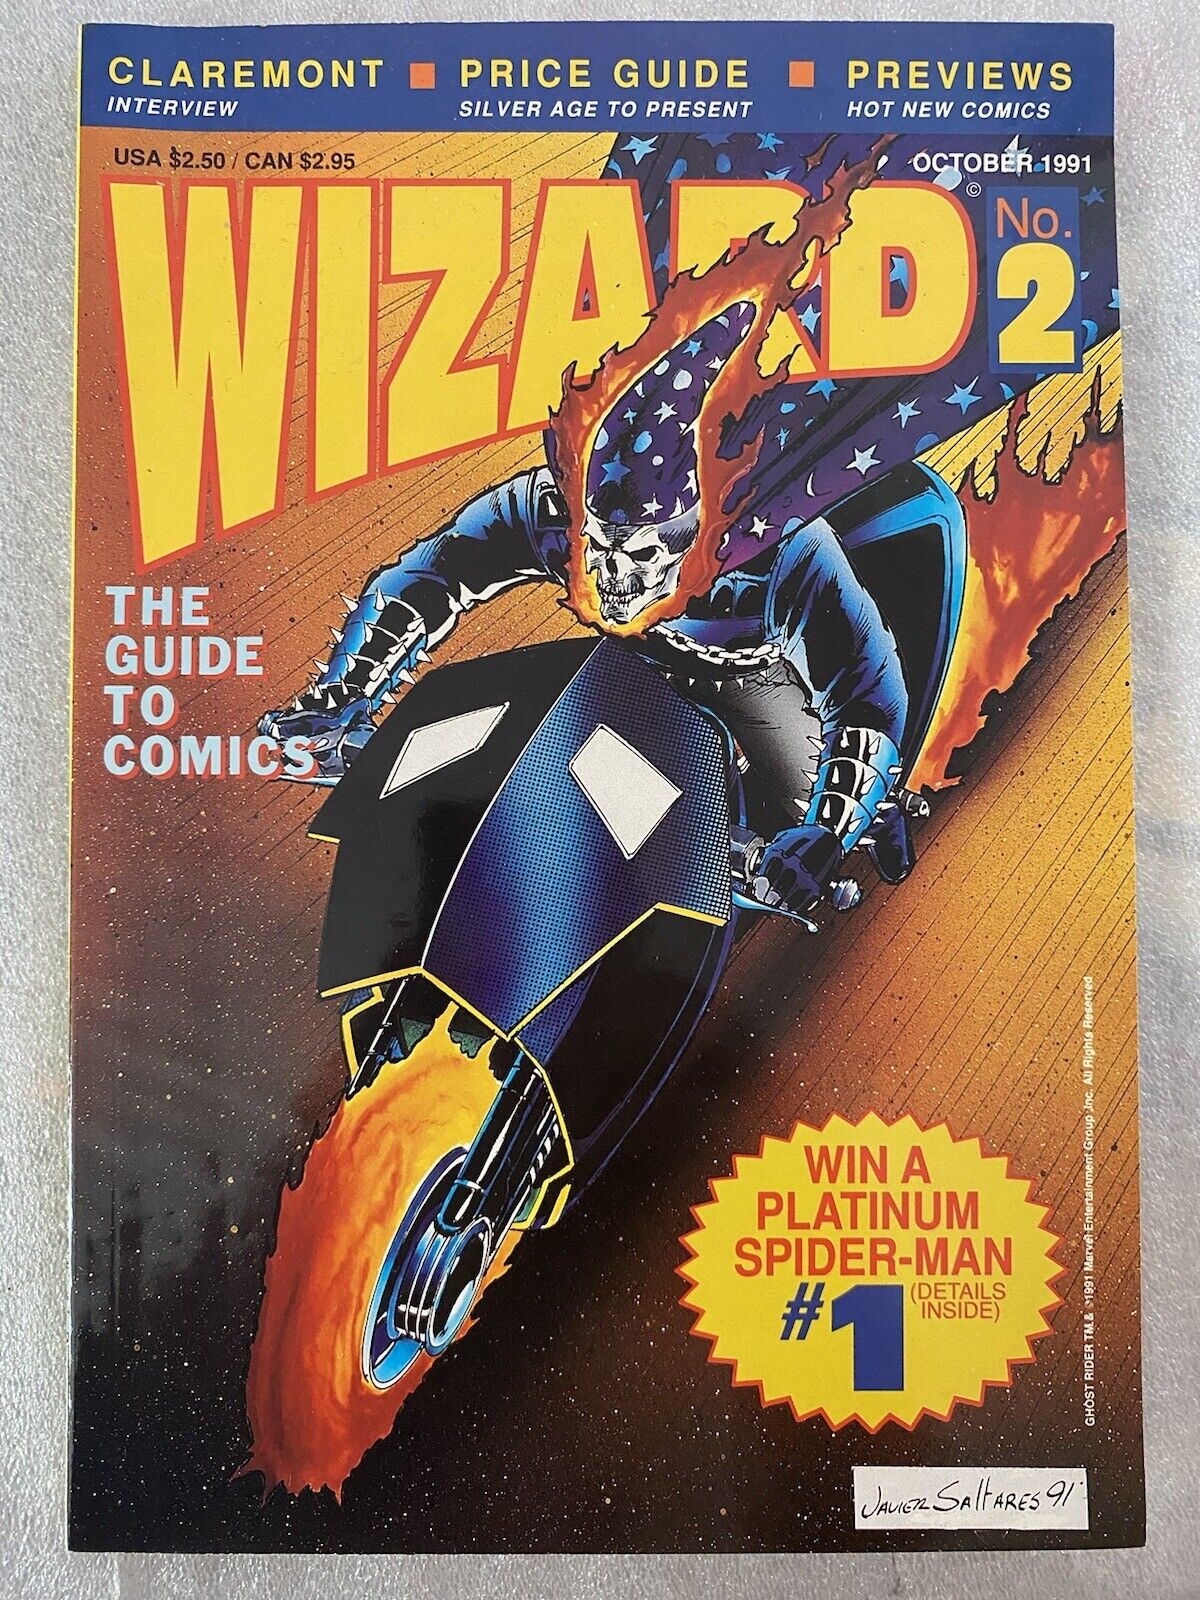 Wizard The Guide to Comics #2 (1991) Ghost Rider Cover With POSTER